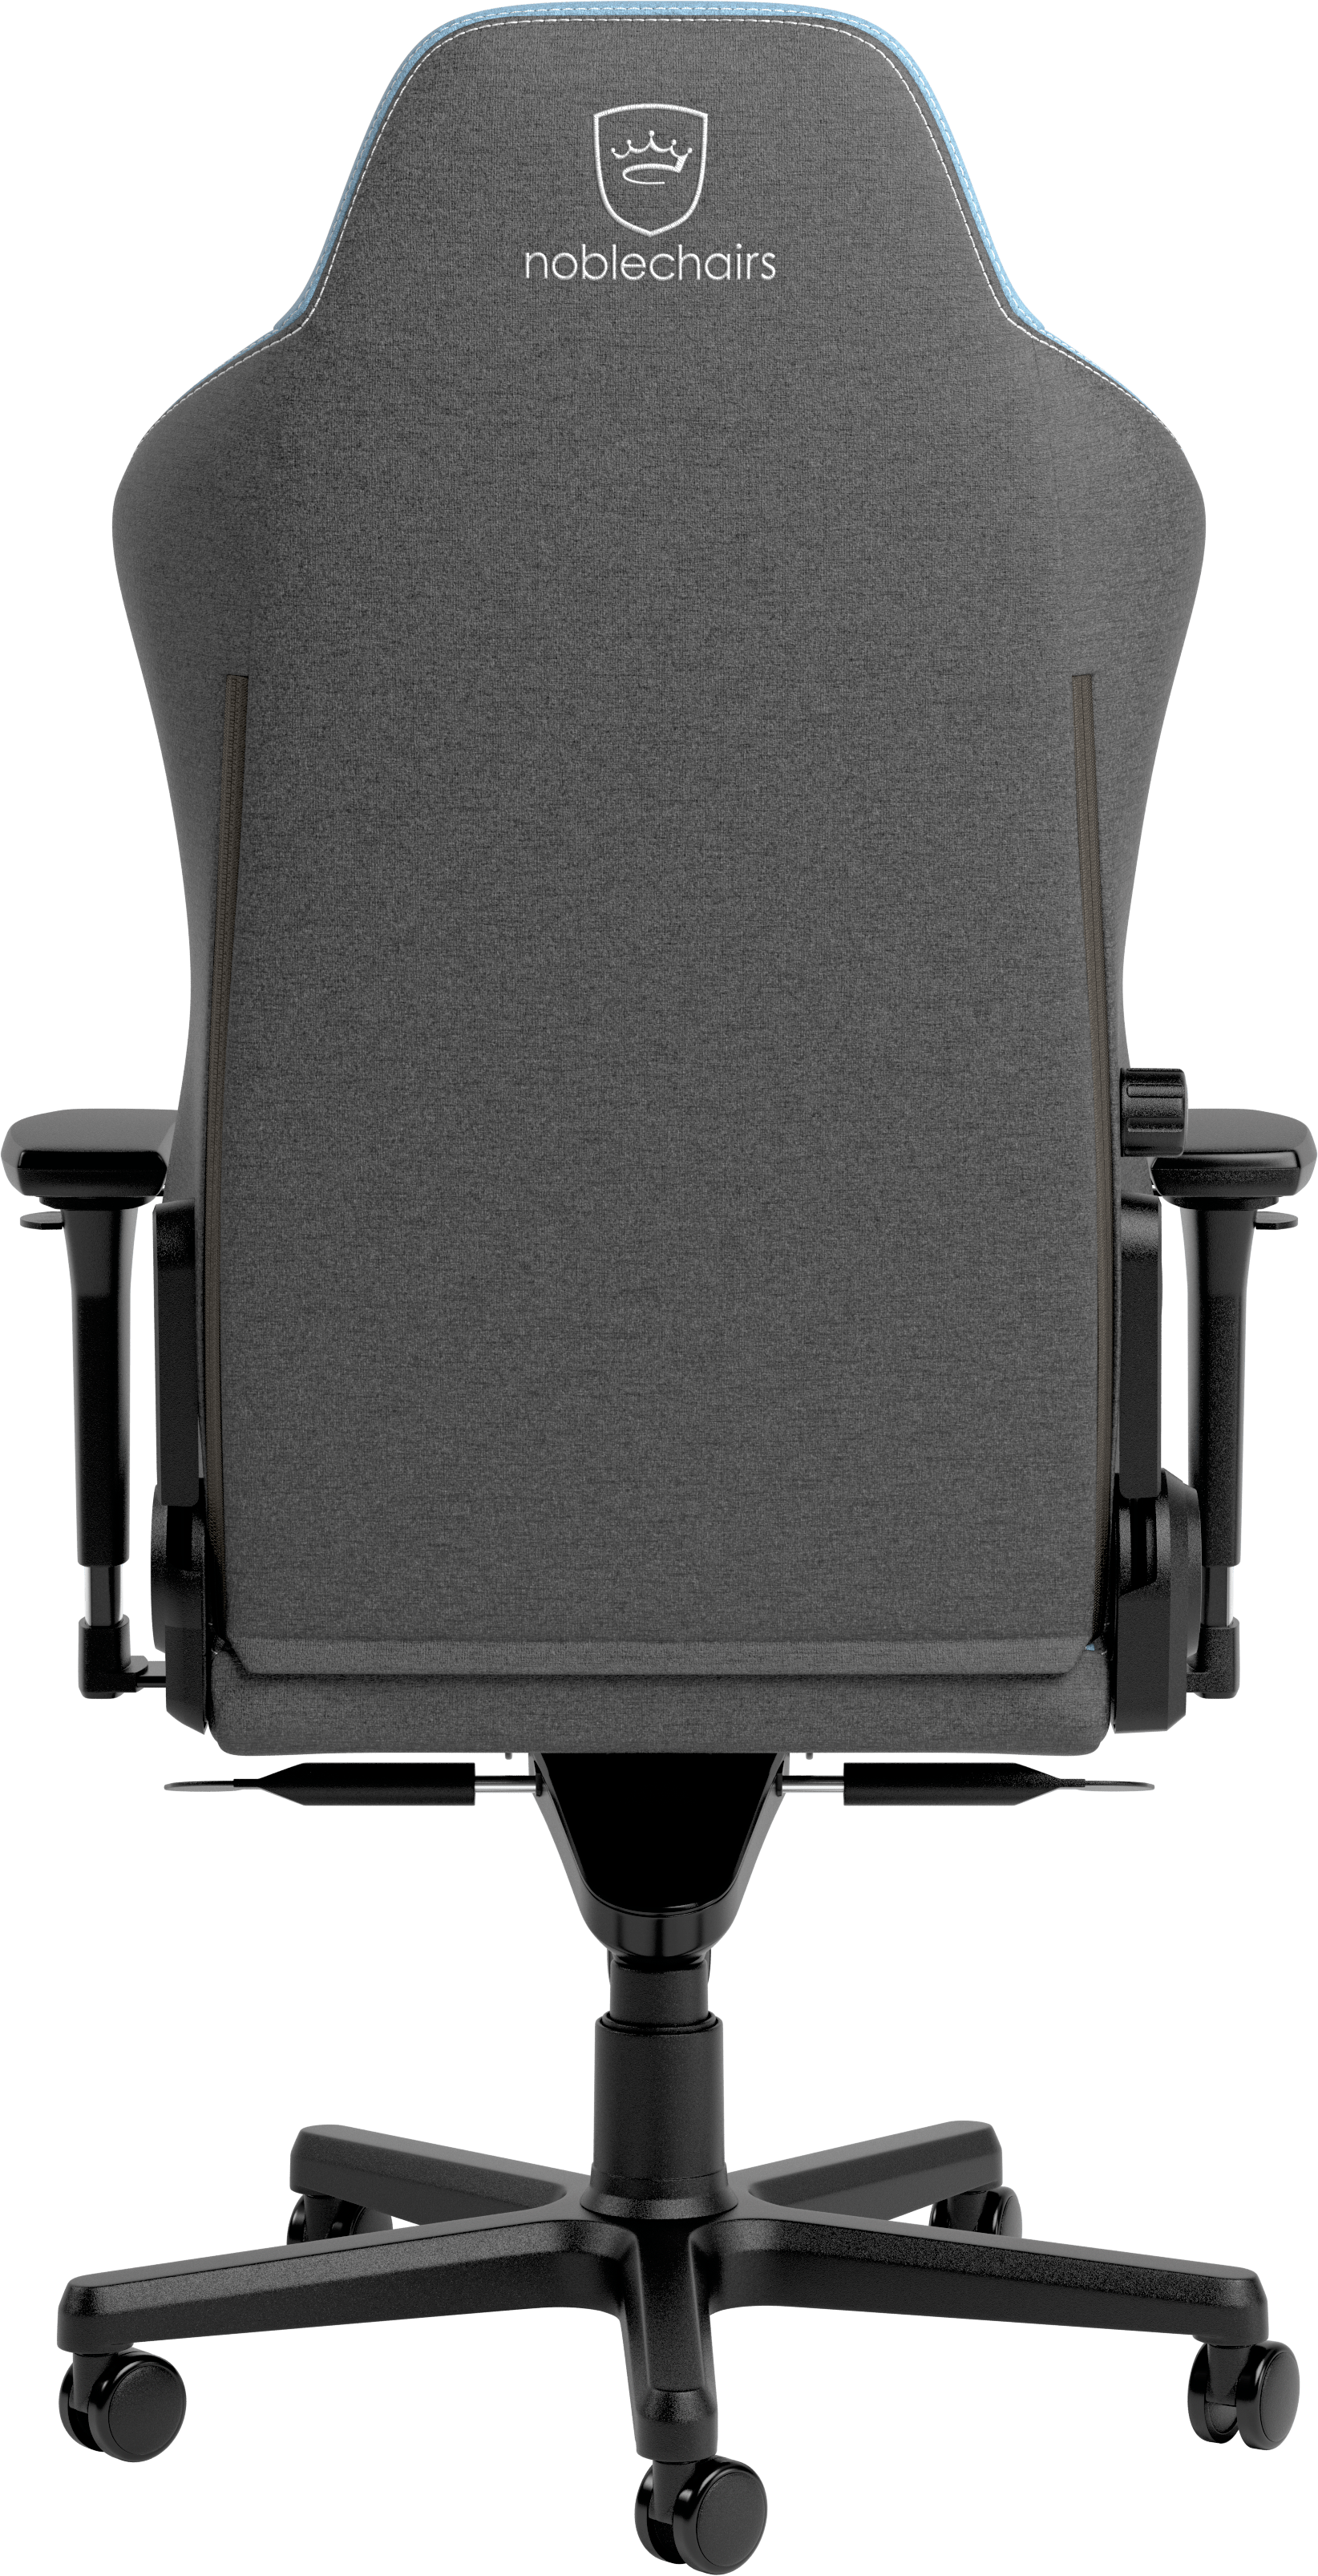 noblechairs HERO TX Two Tone Blue Limited Edition stoffen bekleding